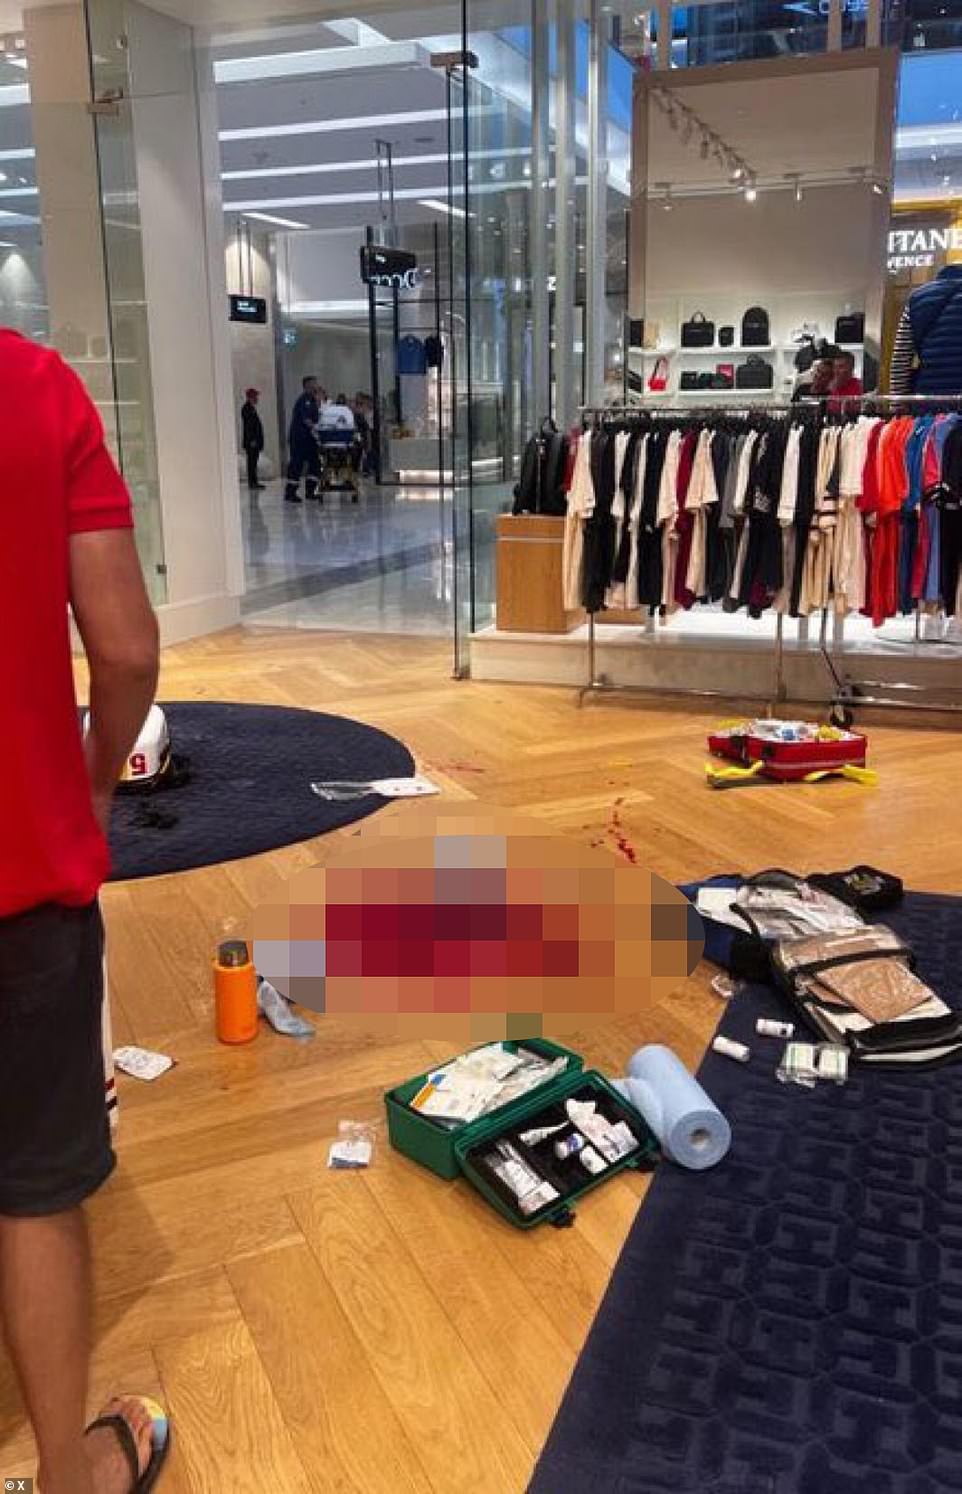 Blood stains seen inside a store in the shopping center